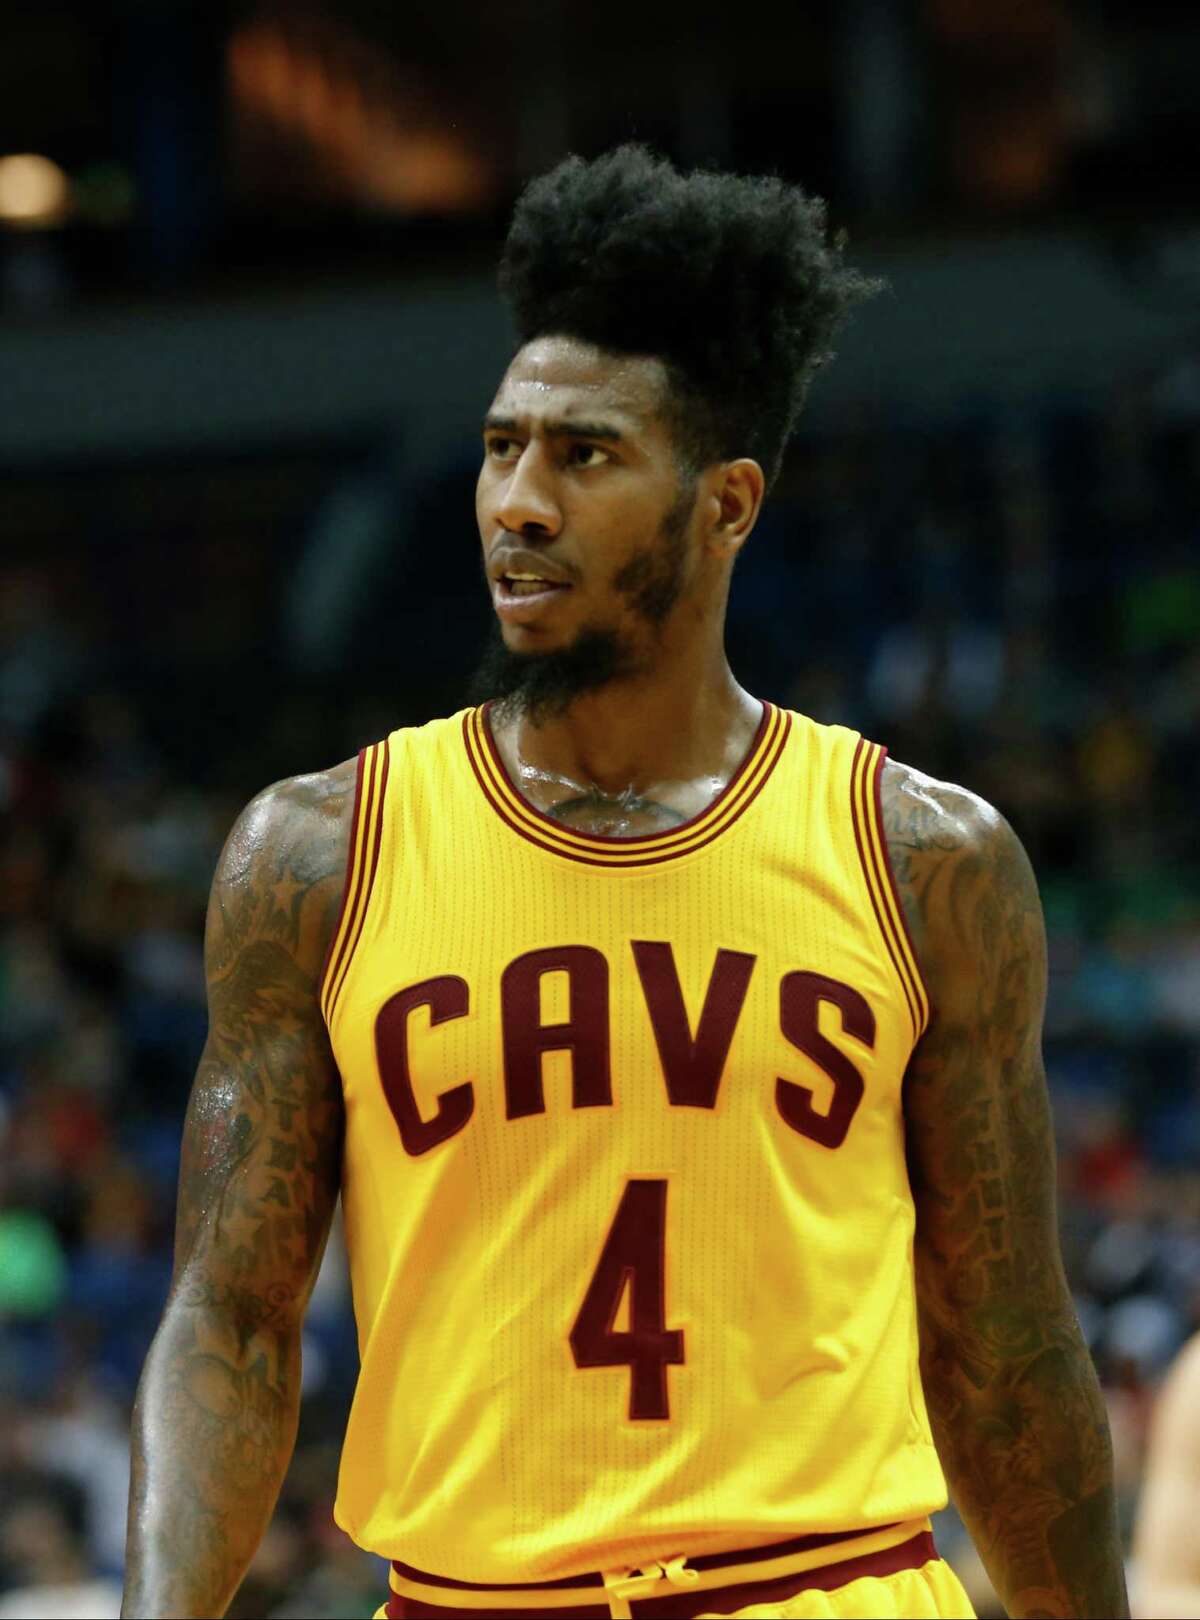 Rockets looking for sign-and-trade options for Iman Shumpert, Nene